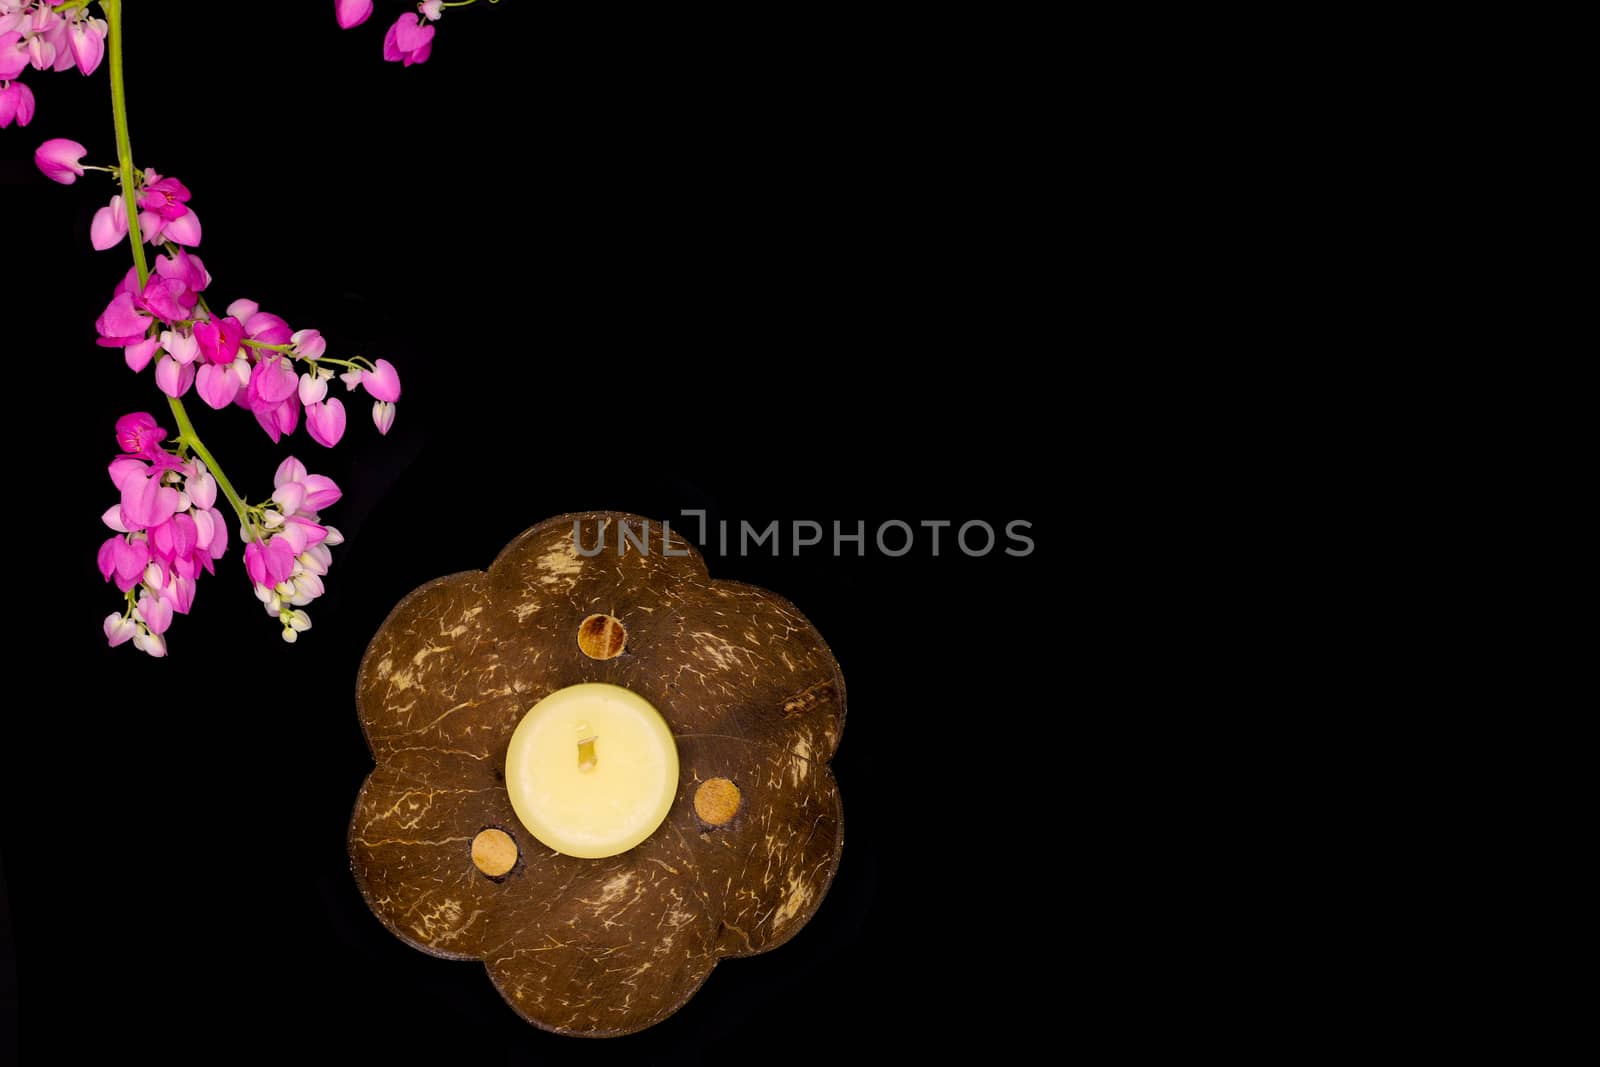 a handmade coconut shell tray, a natural wax fragrance white candle, and vine flowers in dark background